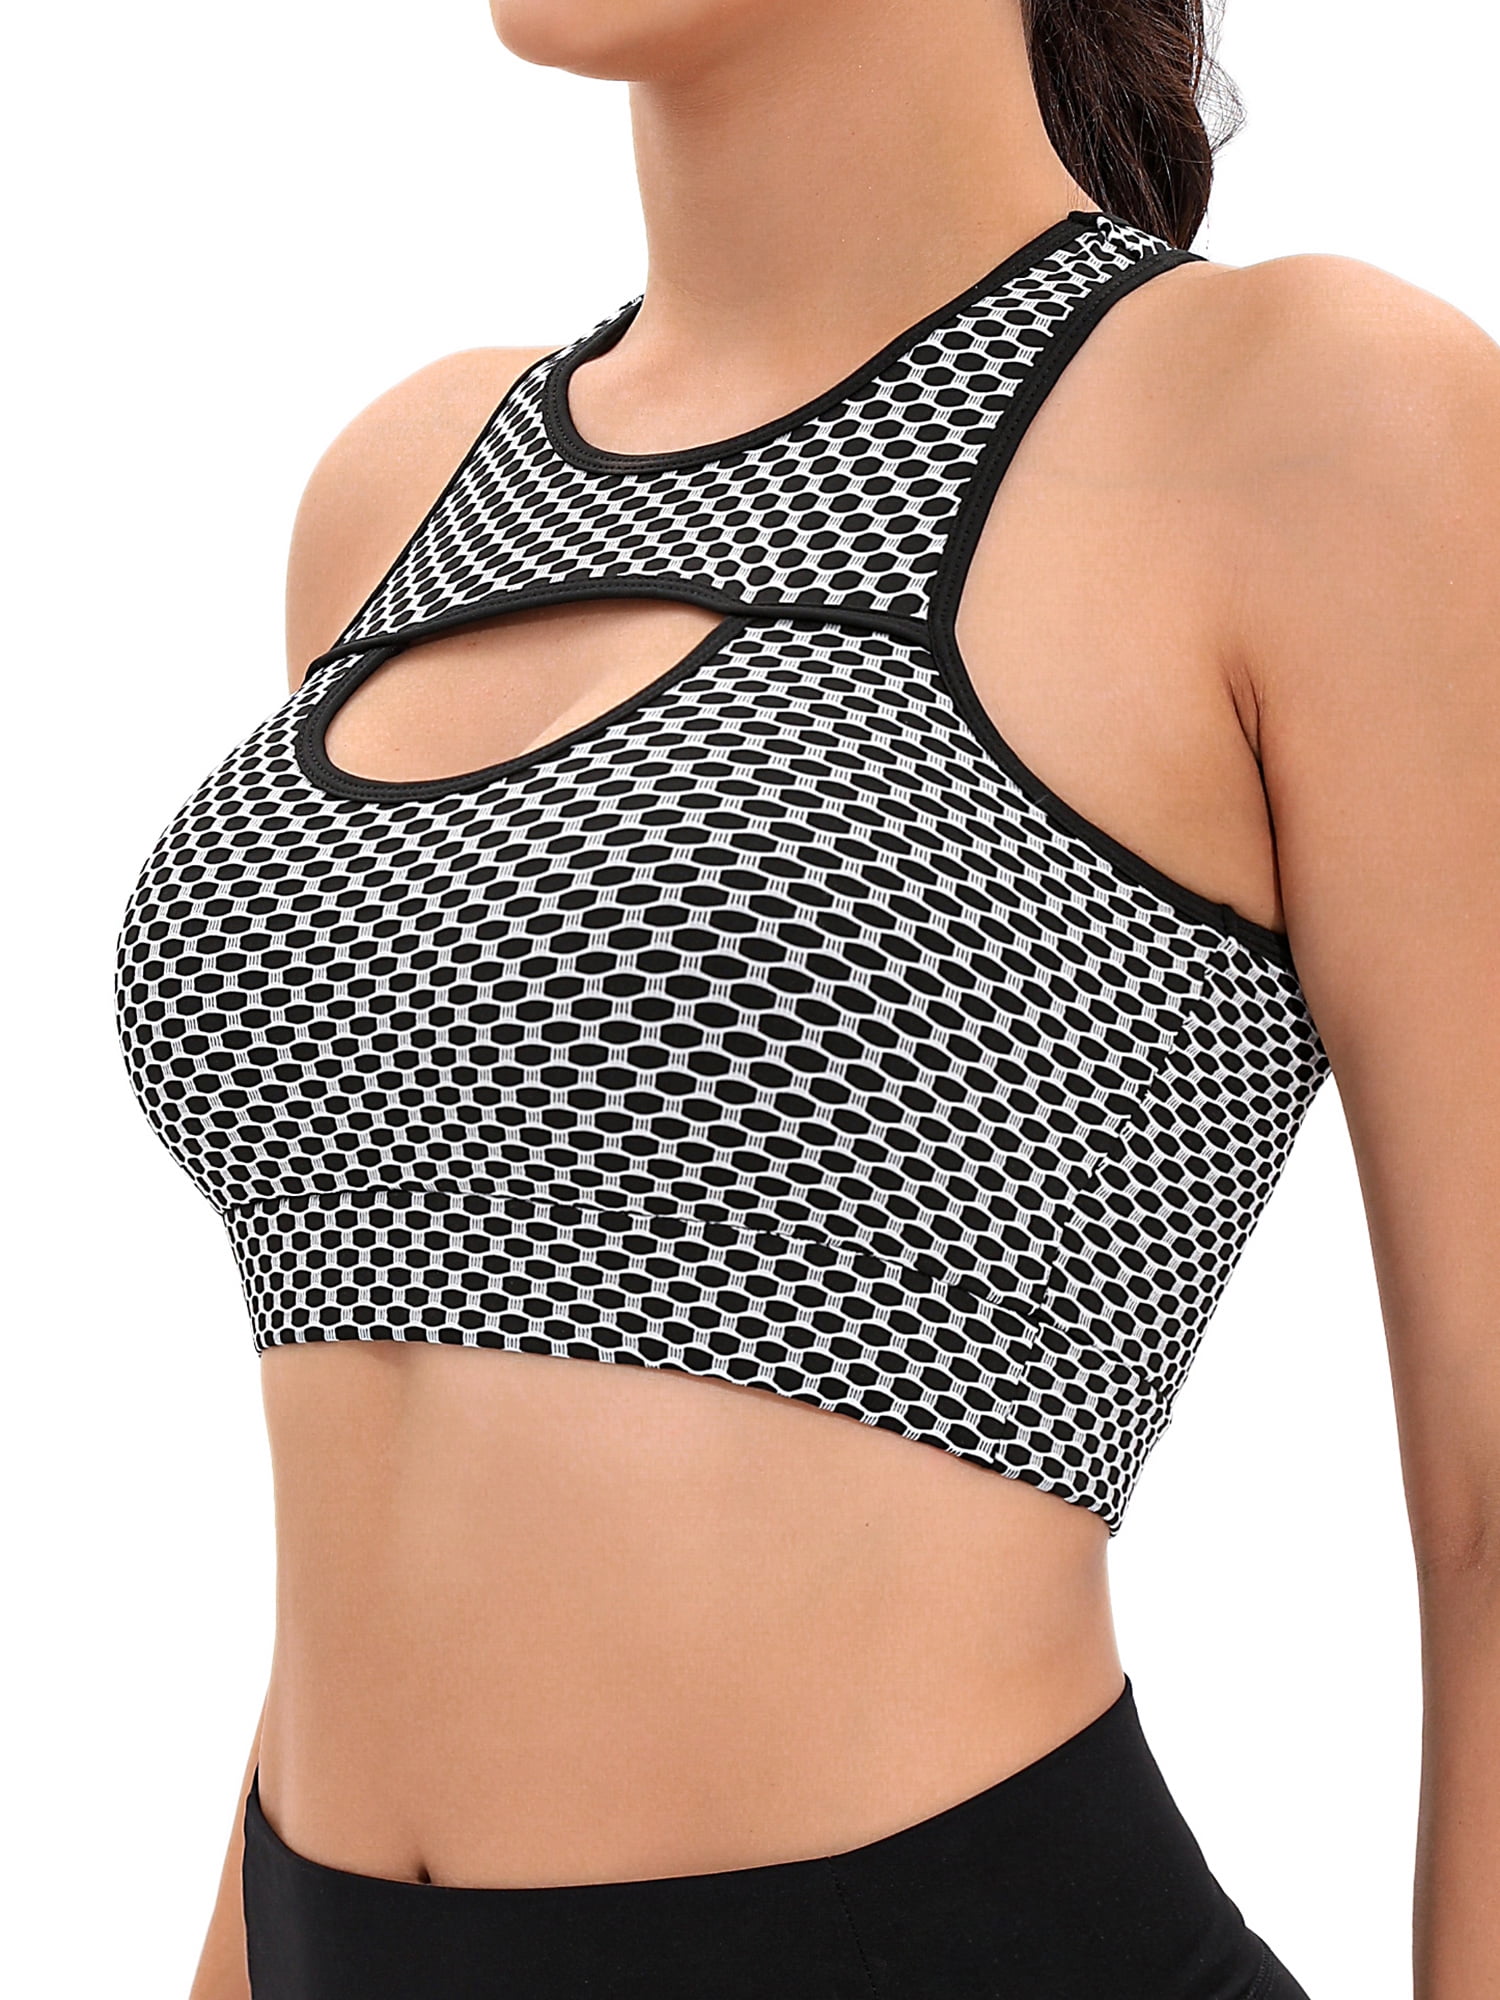 Sport Bra with Padding Products